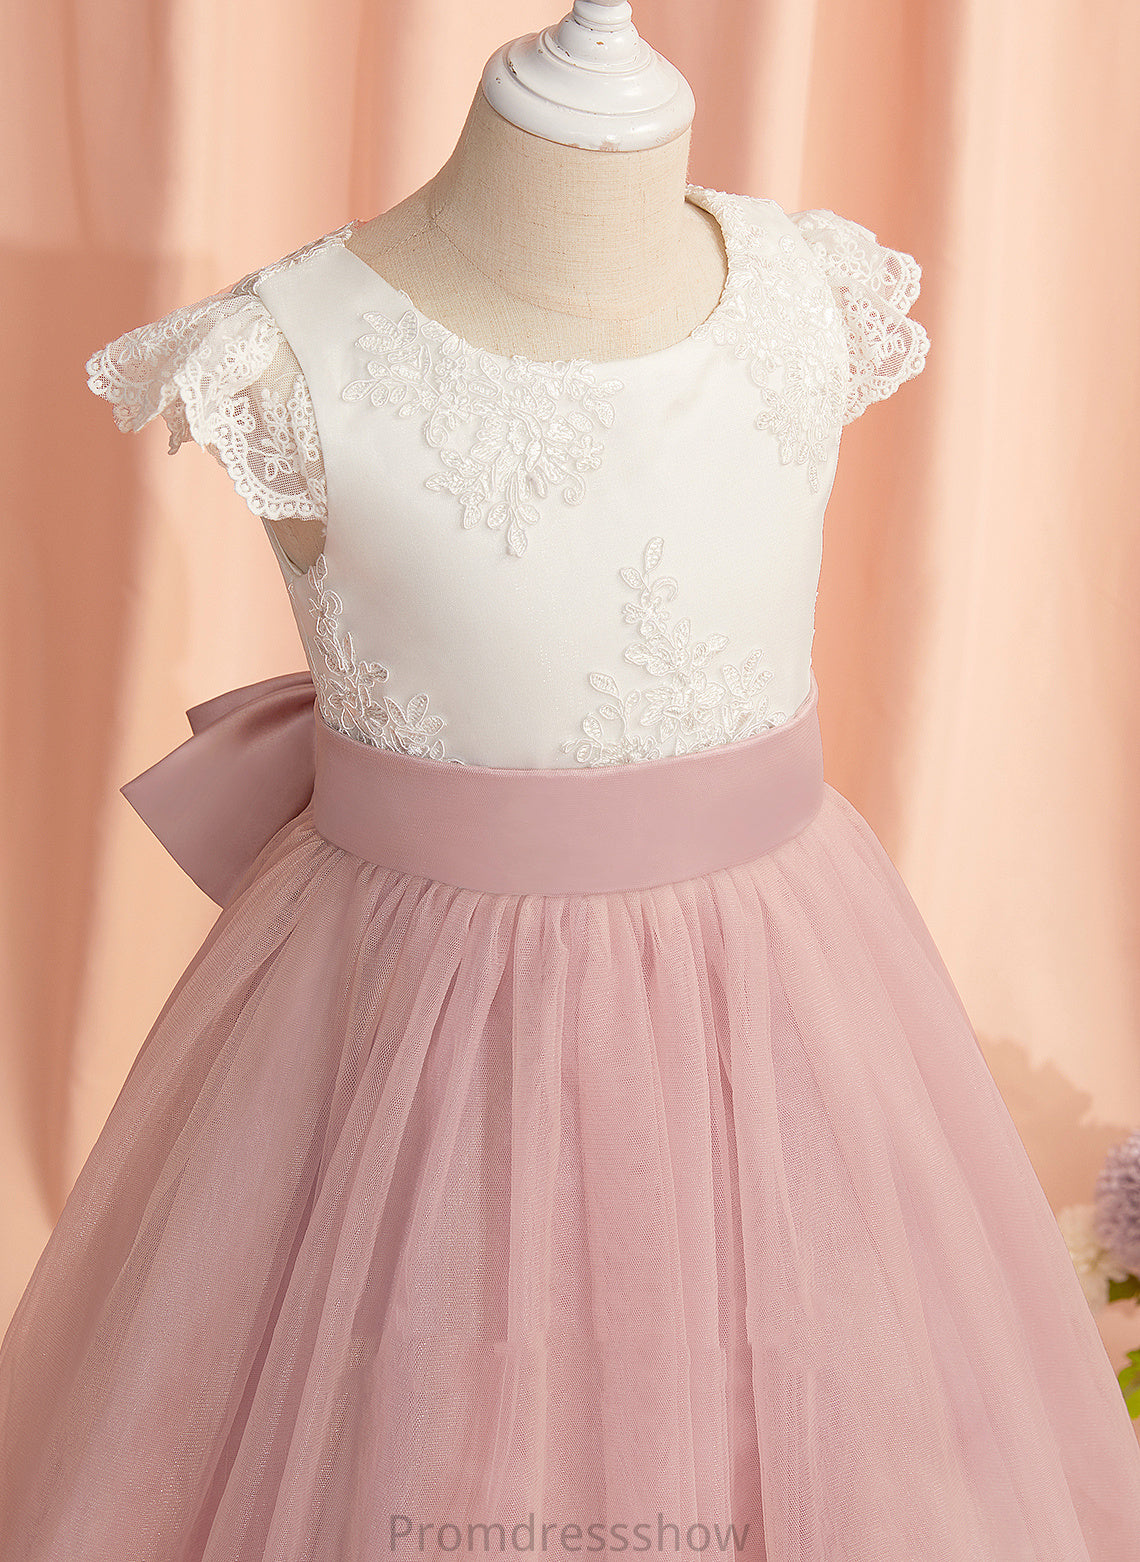 Lace/Bow(s) Scoop A-Line Annabel Sleeves Short Flower Knee-length Girl Tulle With Dress Neck Flower Girl Dresses -